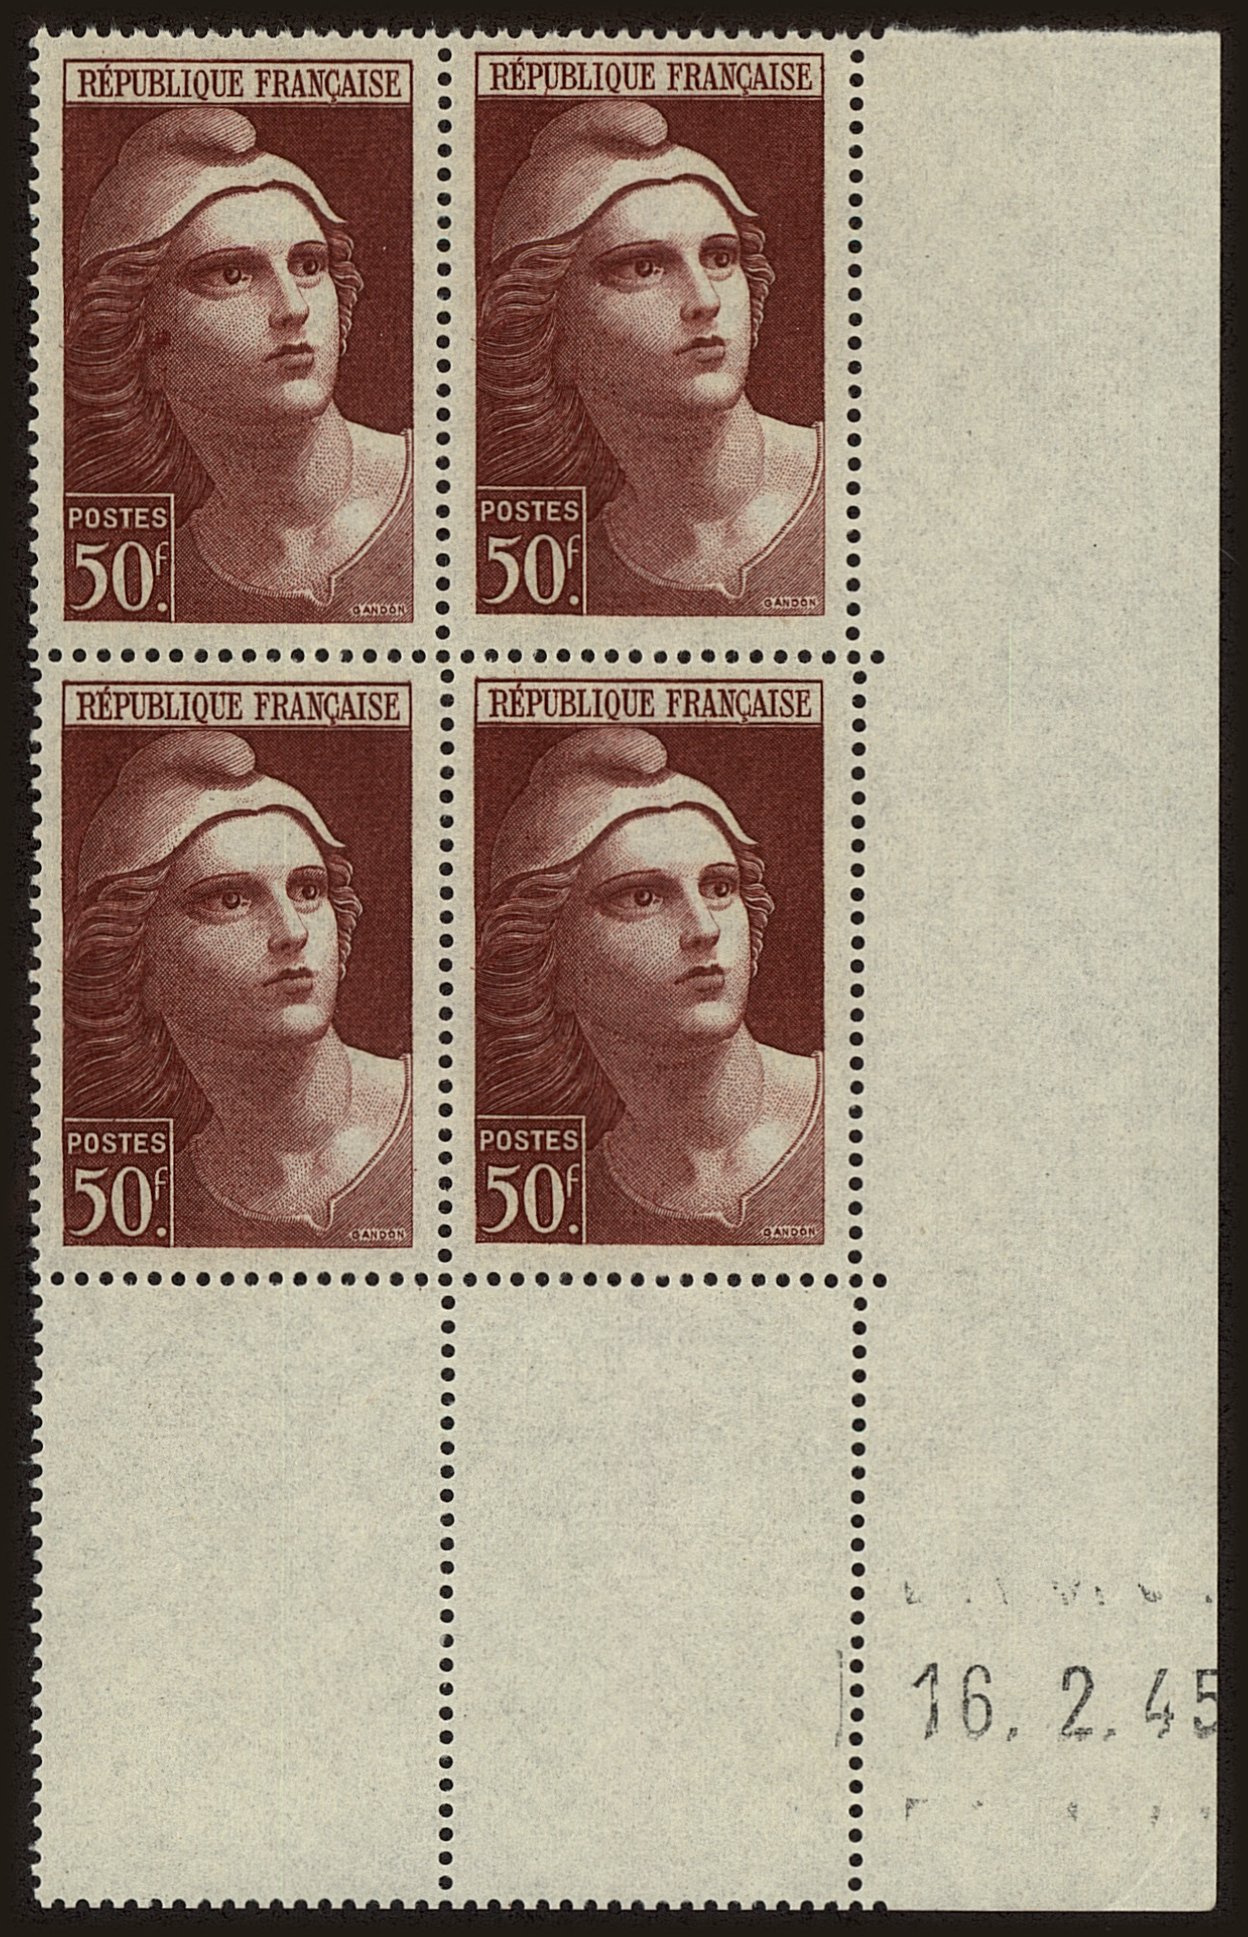 Front view of France 555 collectors stamp